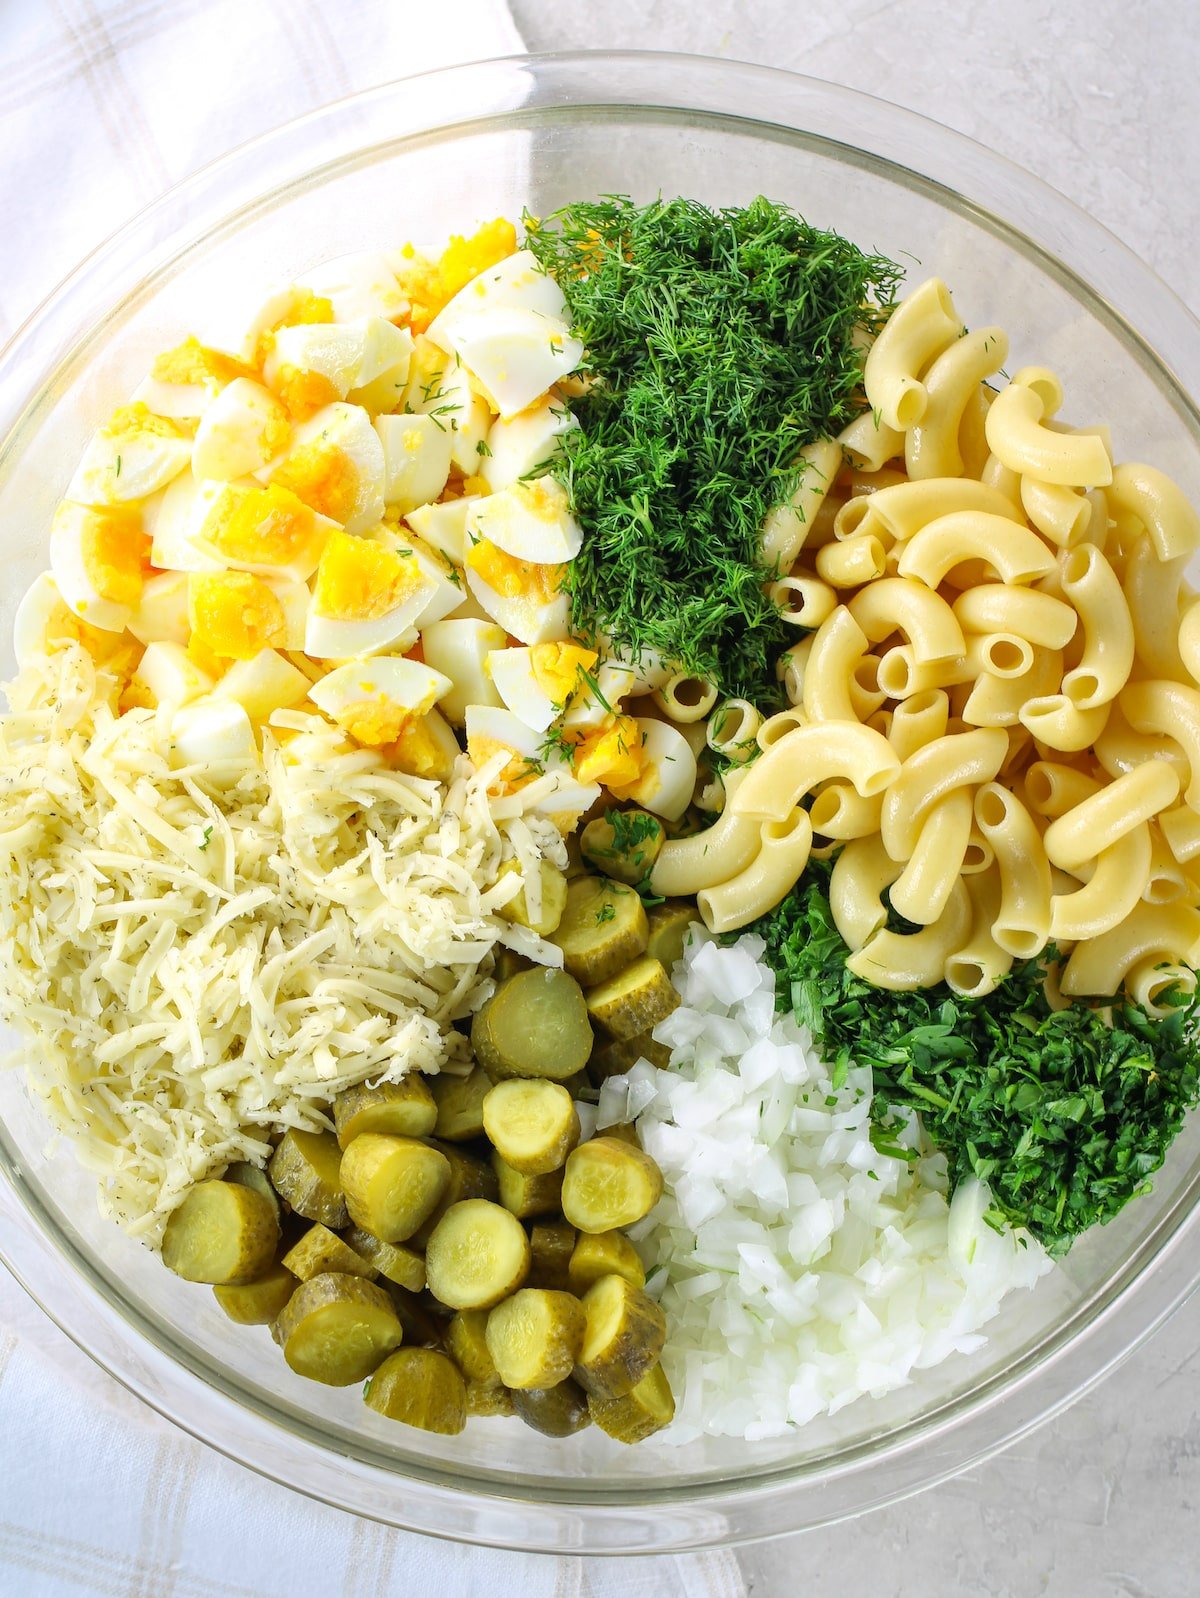 Ingredients for Macaroni salad in a bowl before combining.